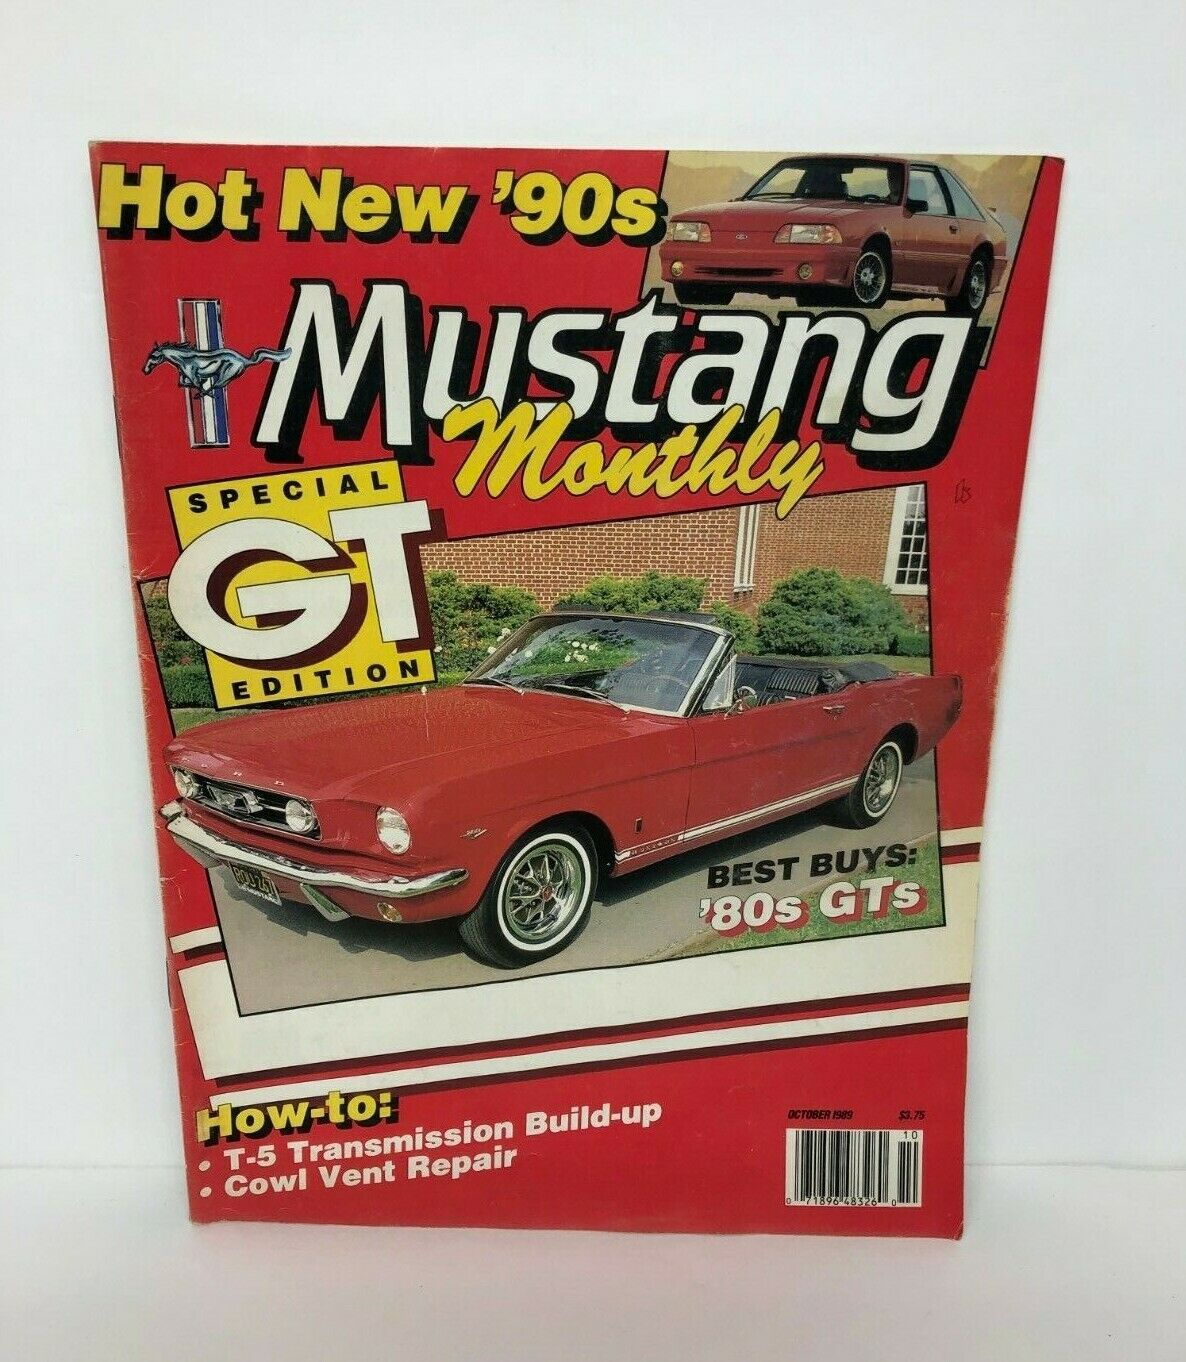 Vintage Mustang Monthly Magazine October 1989 - Special GT Edition 80\'s GTs